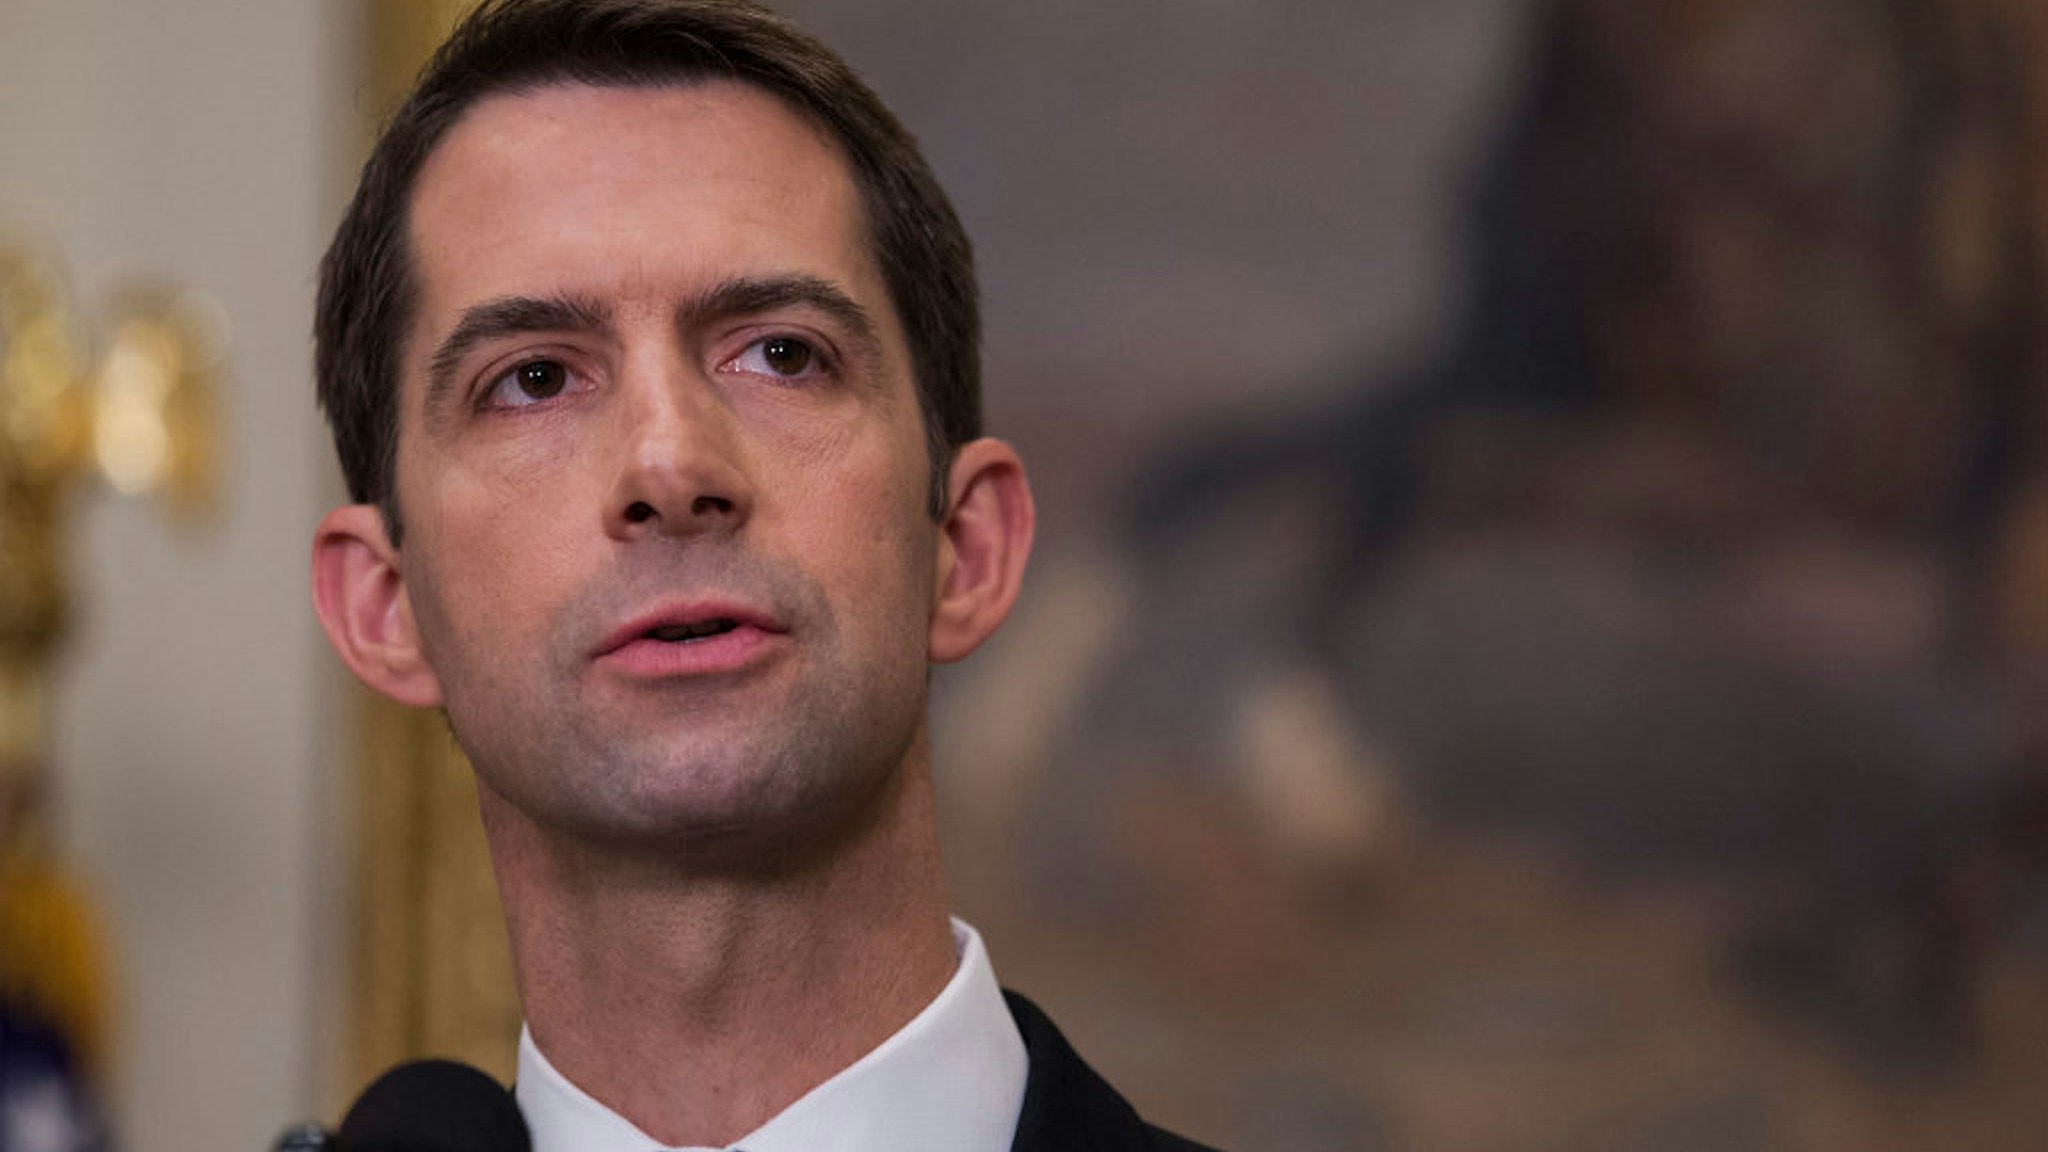 Sen. Tom Cotton (R-AR) makes an announcement on the introduction of the Reforming American Immigration for a Strong Economy (RAISE) Act in the Roosevelt Room at the White House on August 2, 2017 in Washington, DC.